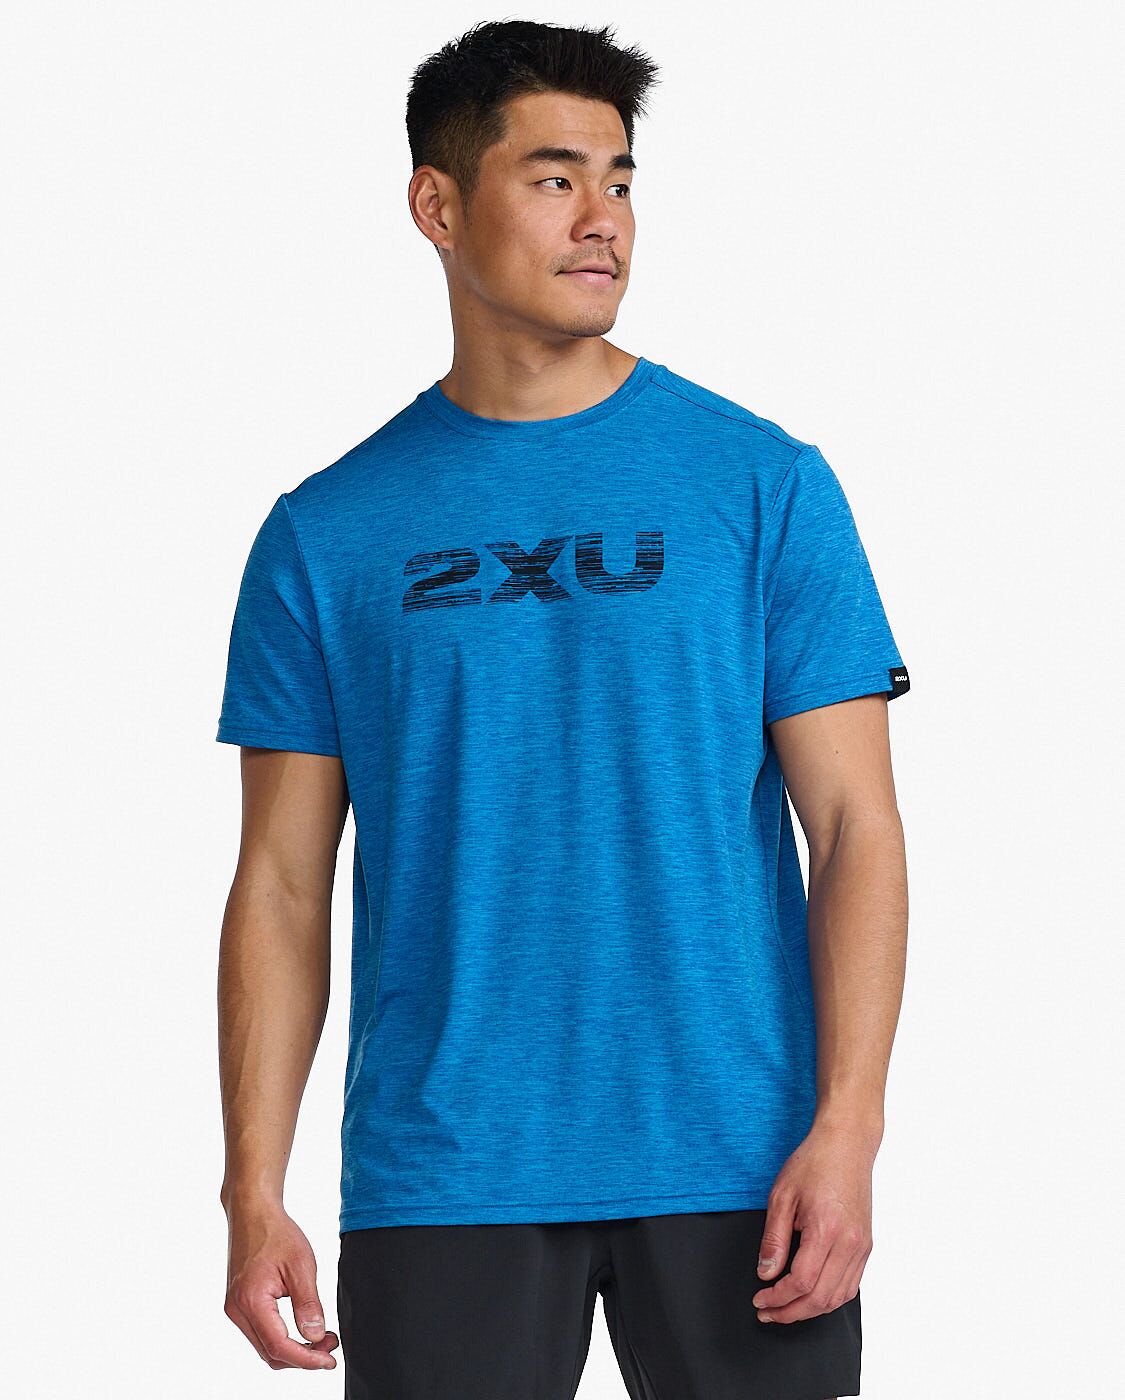 2XU South Africa - Mens Motion Graphic Tee - ETK/MDN